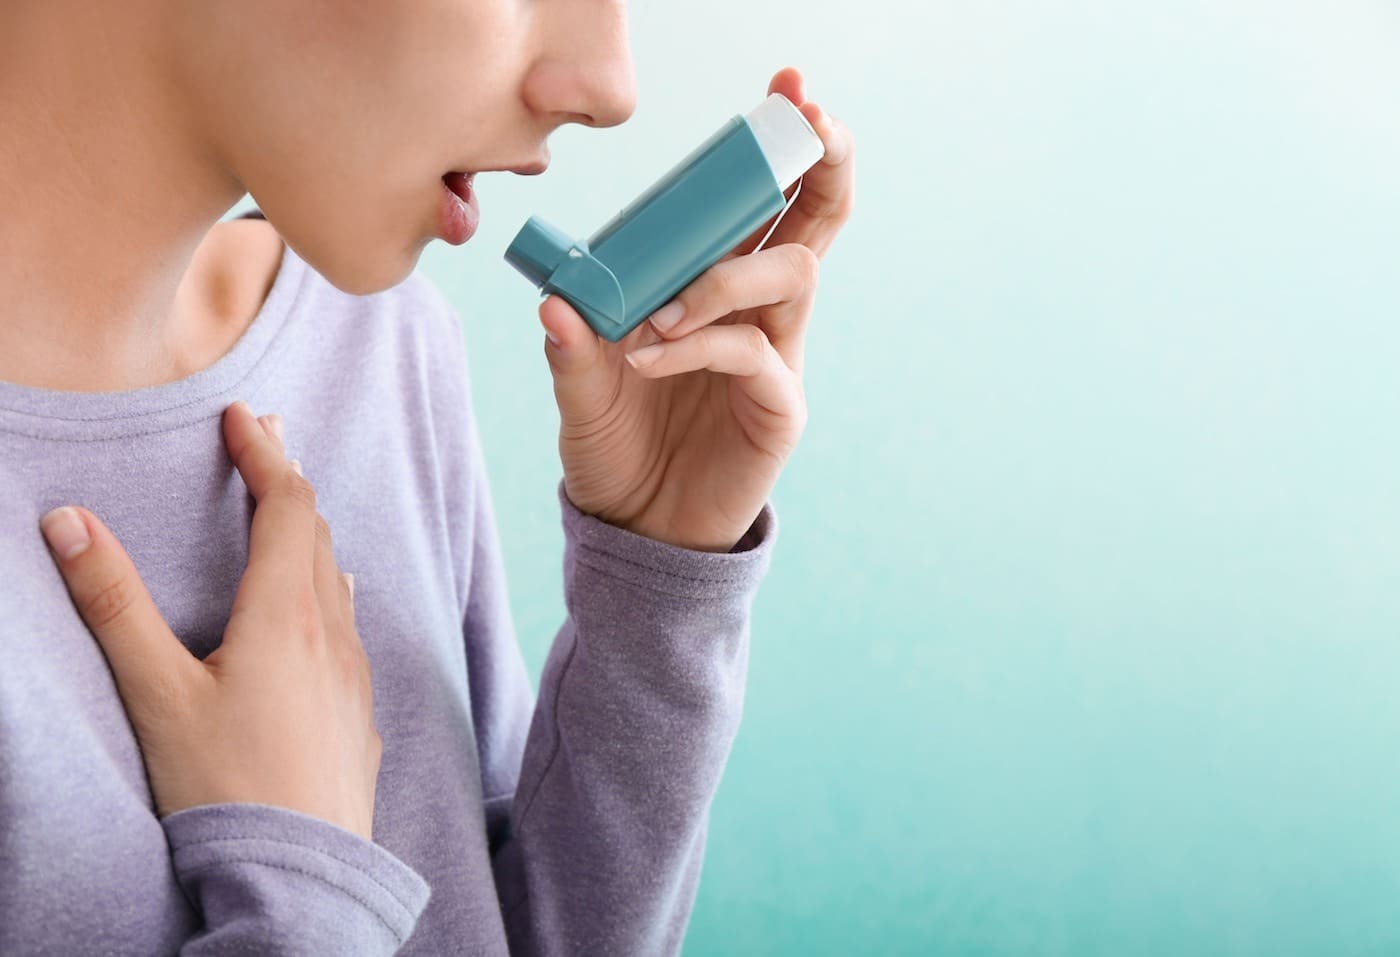 Are people with asthma more at risk of COVID-19?